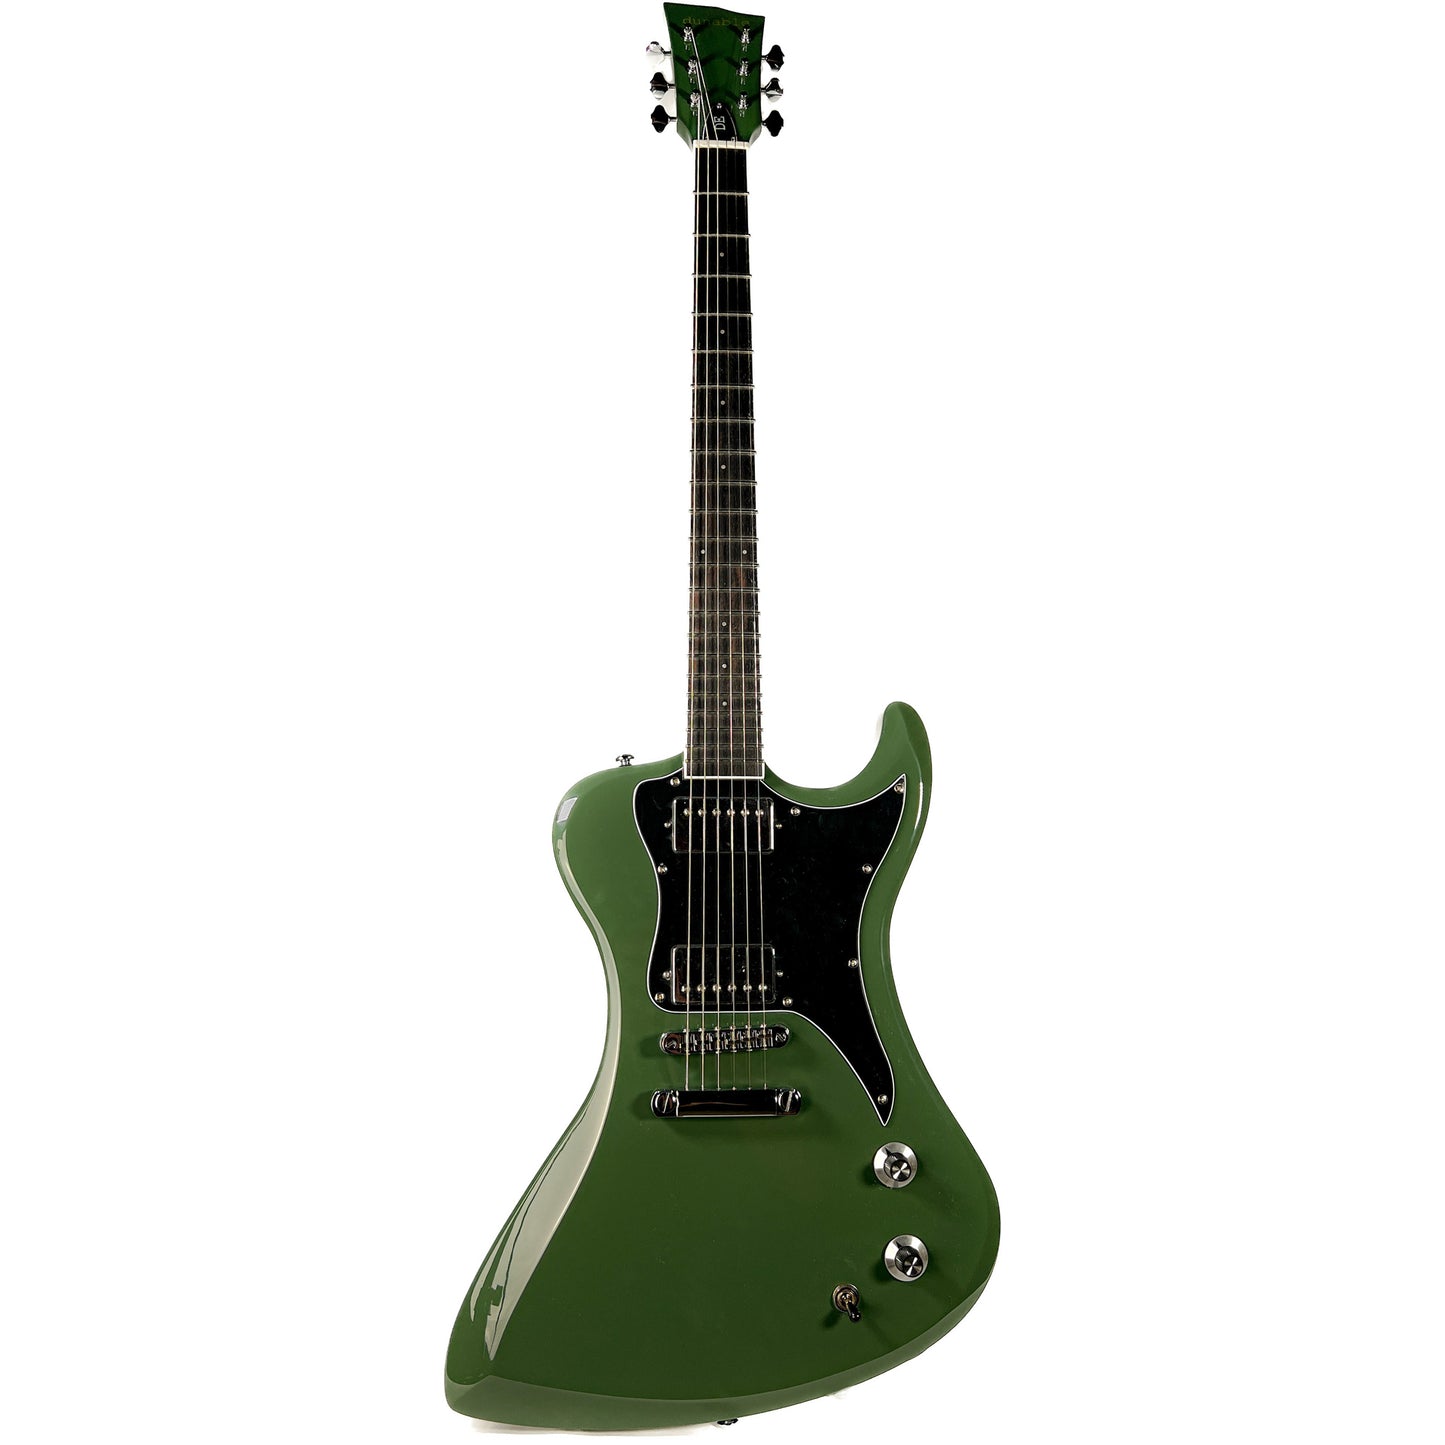 Dunable R2 DE Electric Guitar - Olive Green